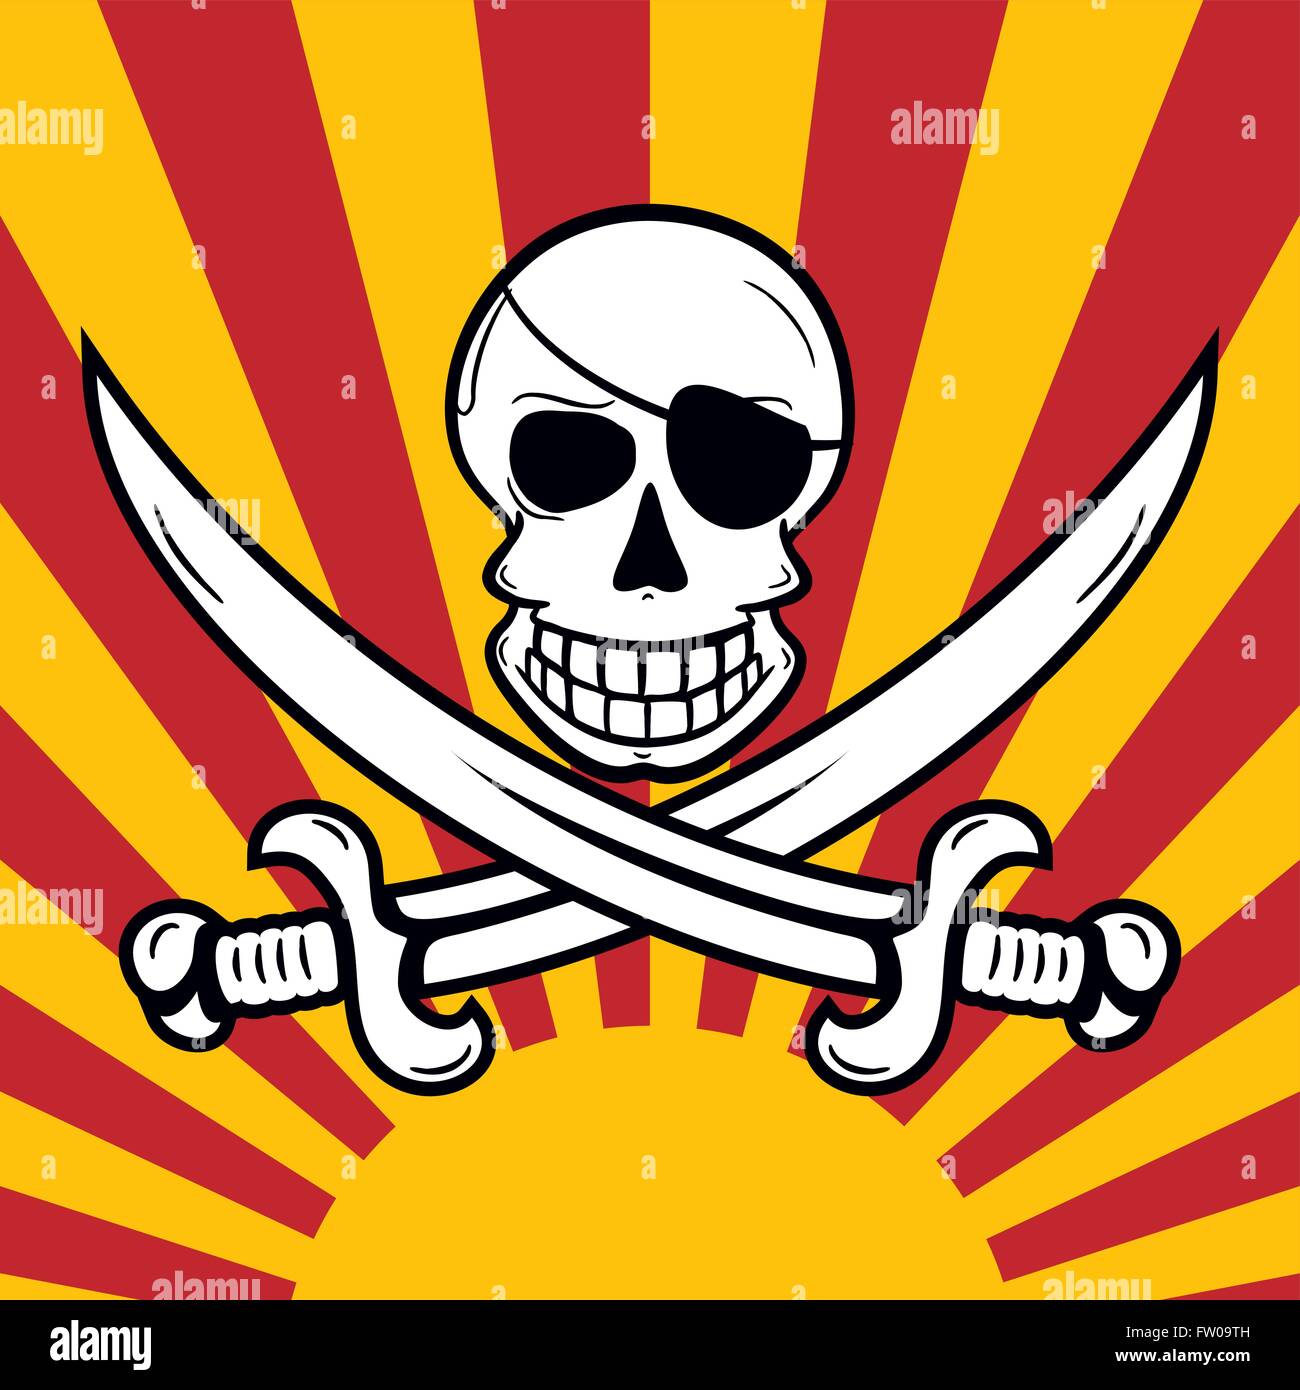 Jolly Roger pirate flag à la Jack Rackham with a skull and two crossing swords and a sunset / sunrise background Stock Vector